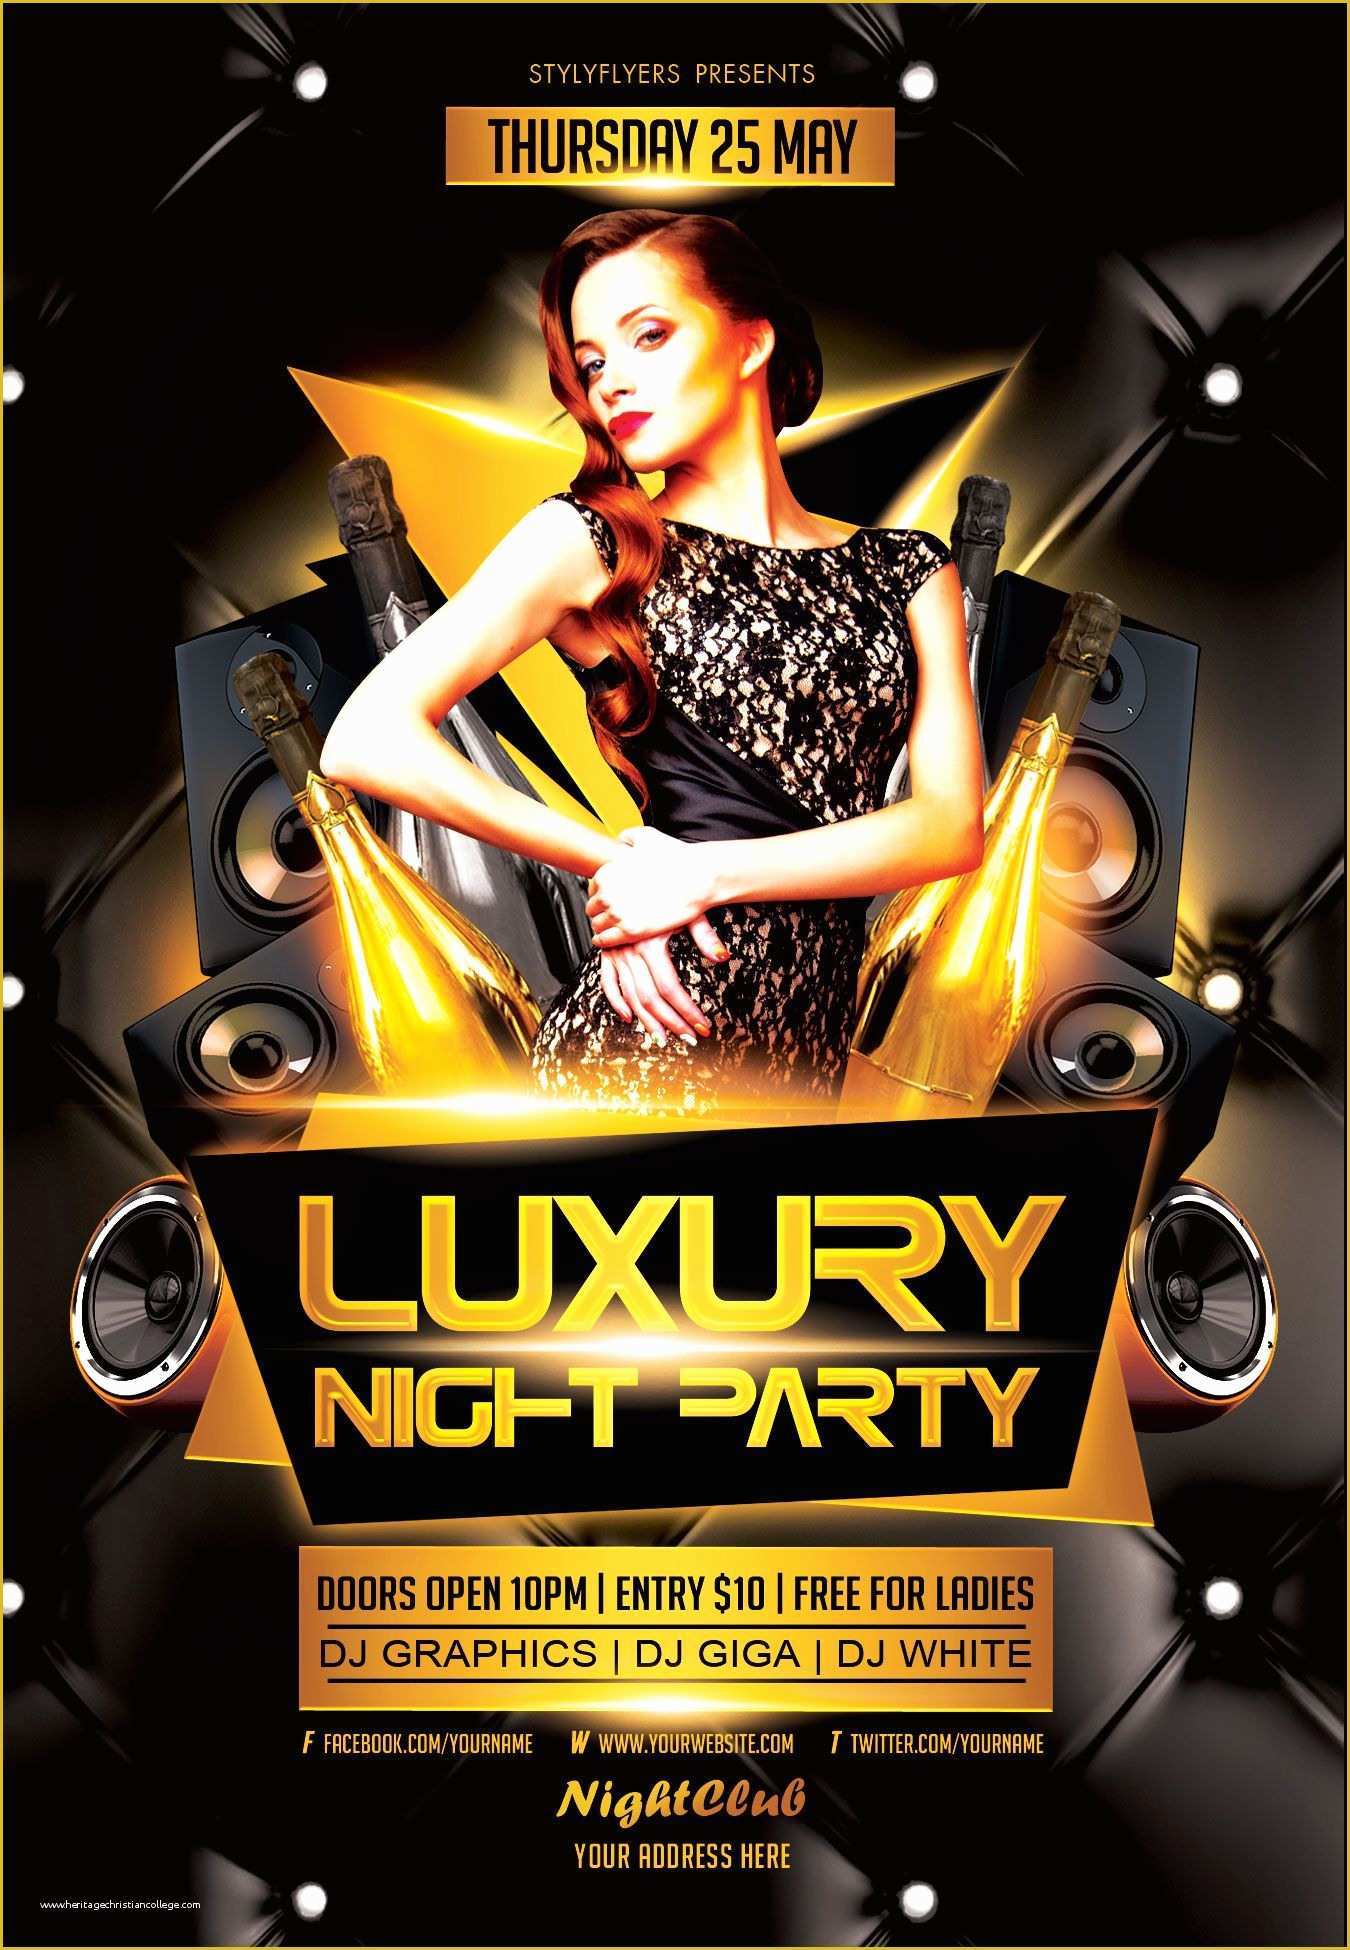 Free Club Flyer Templates Online Of Free Luxury Night Party Flyer Psd Template by Styleflyer